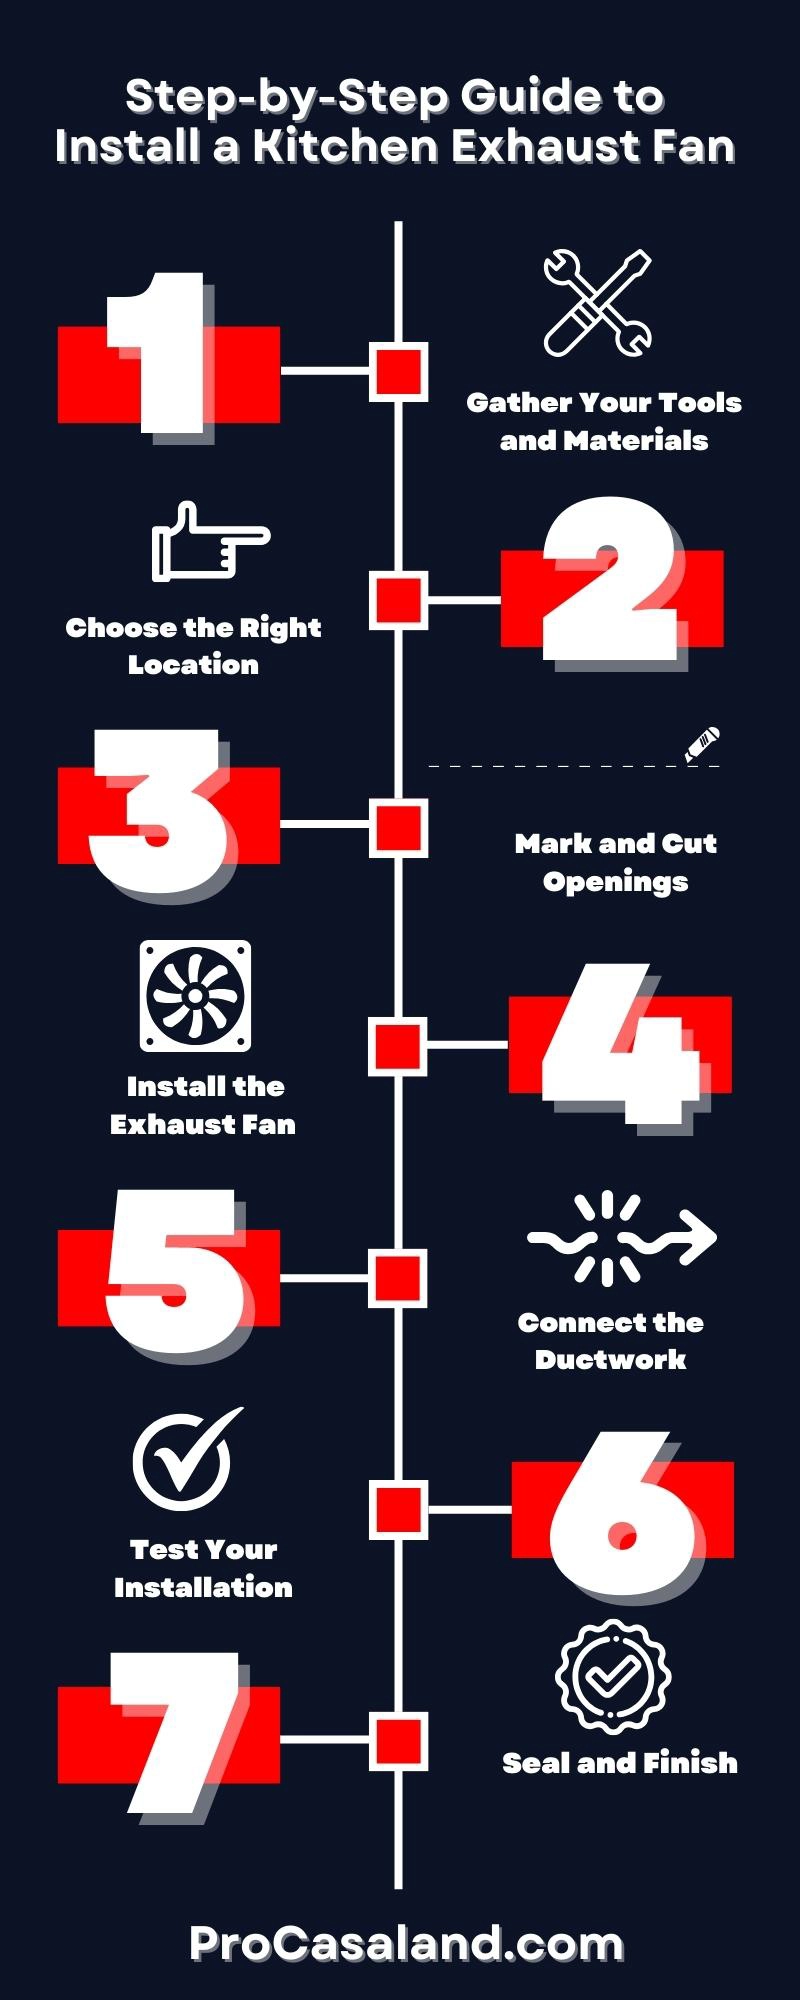 Step by Step Guide to Install a Kitchen Exhaust Fan - Infographic